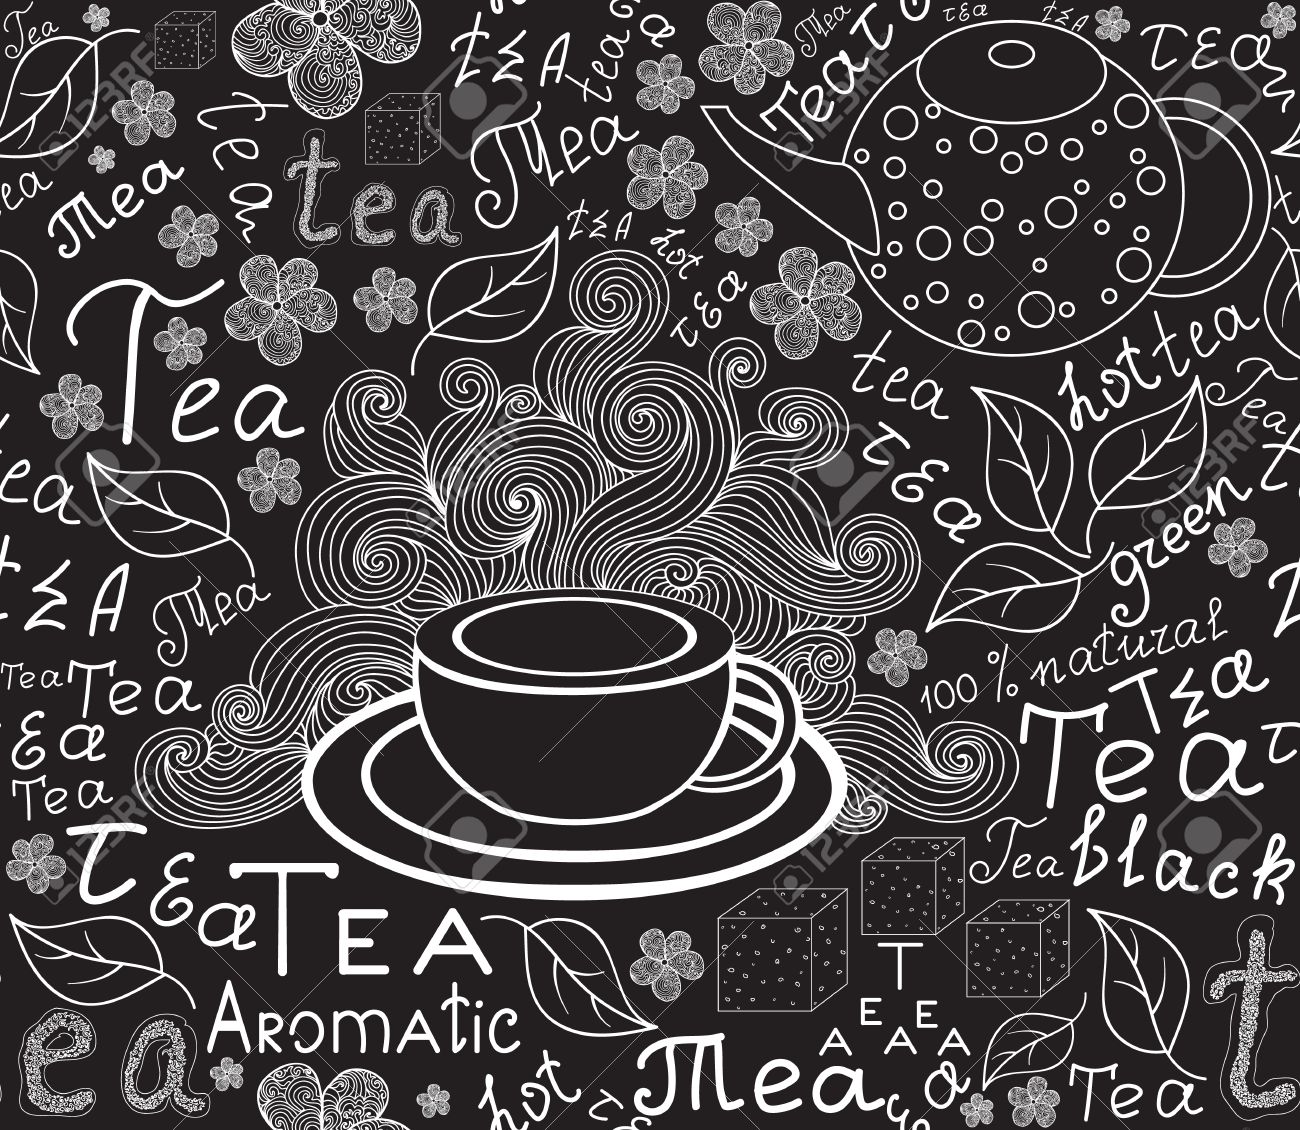 49203576-endless-food-and-drink-texture-with-tea-cups-teapots-tea-leaves-and-handwritten-words-tea-handwritte